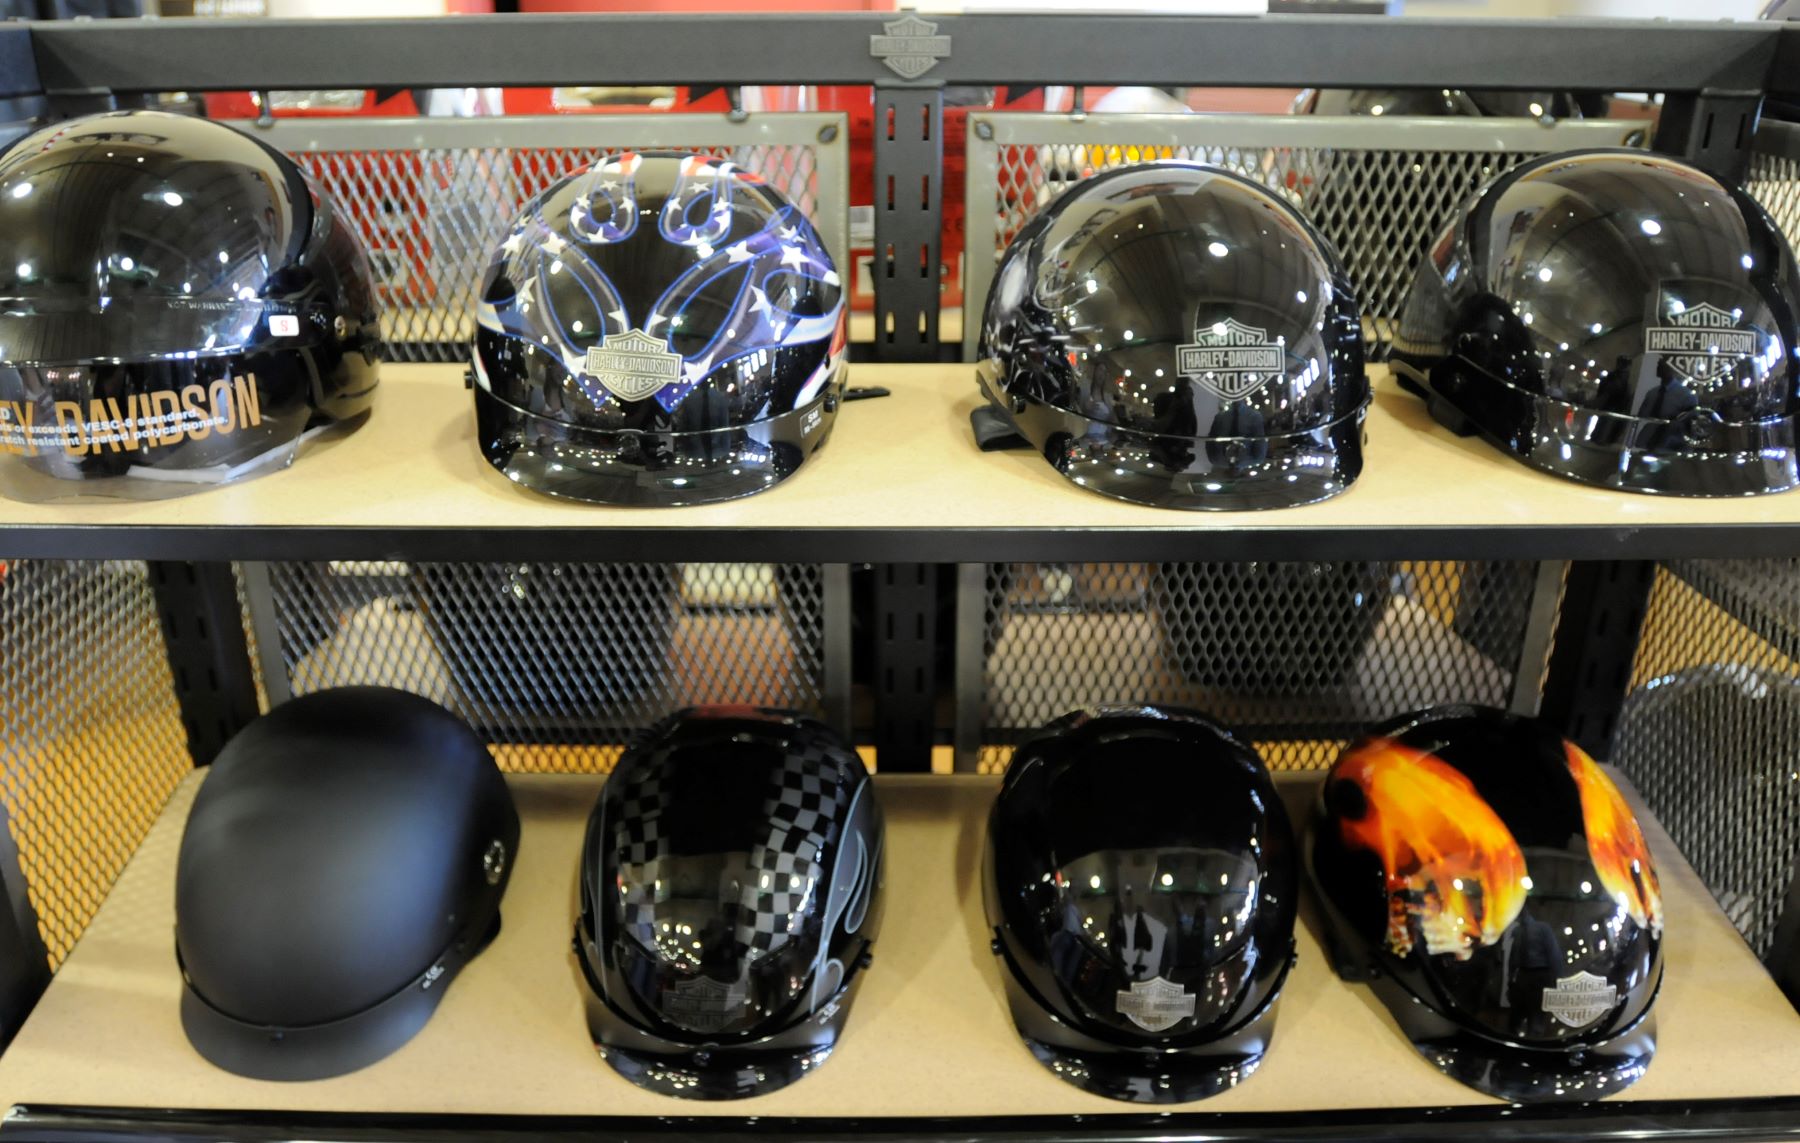 A shelf of Harley-Davidson motorcycle helmets near other safety gear in the Bern Township